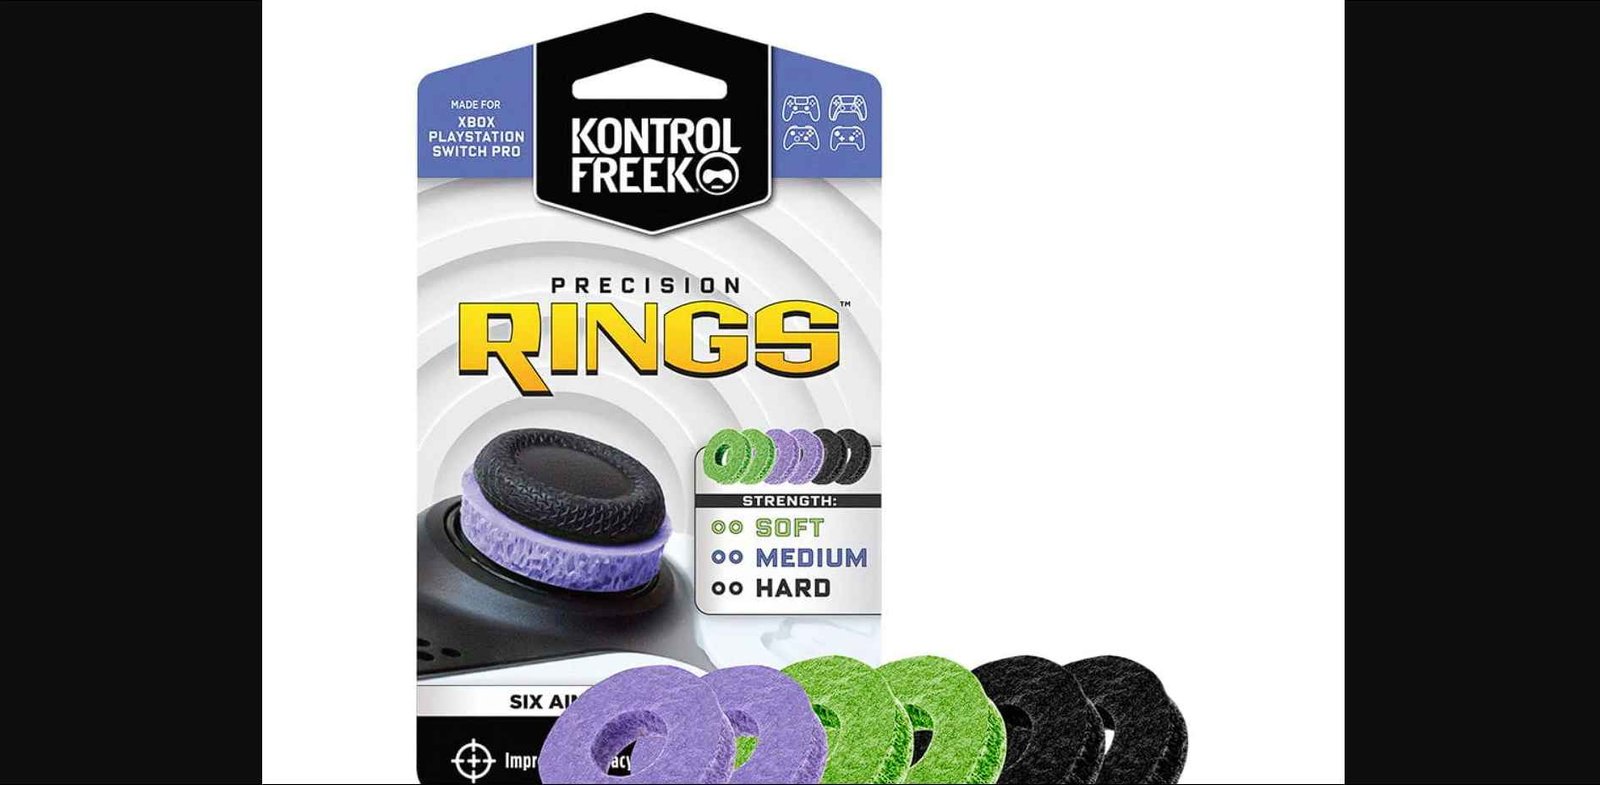 Are Precision Rings good & worth it